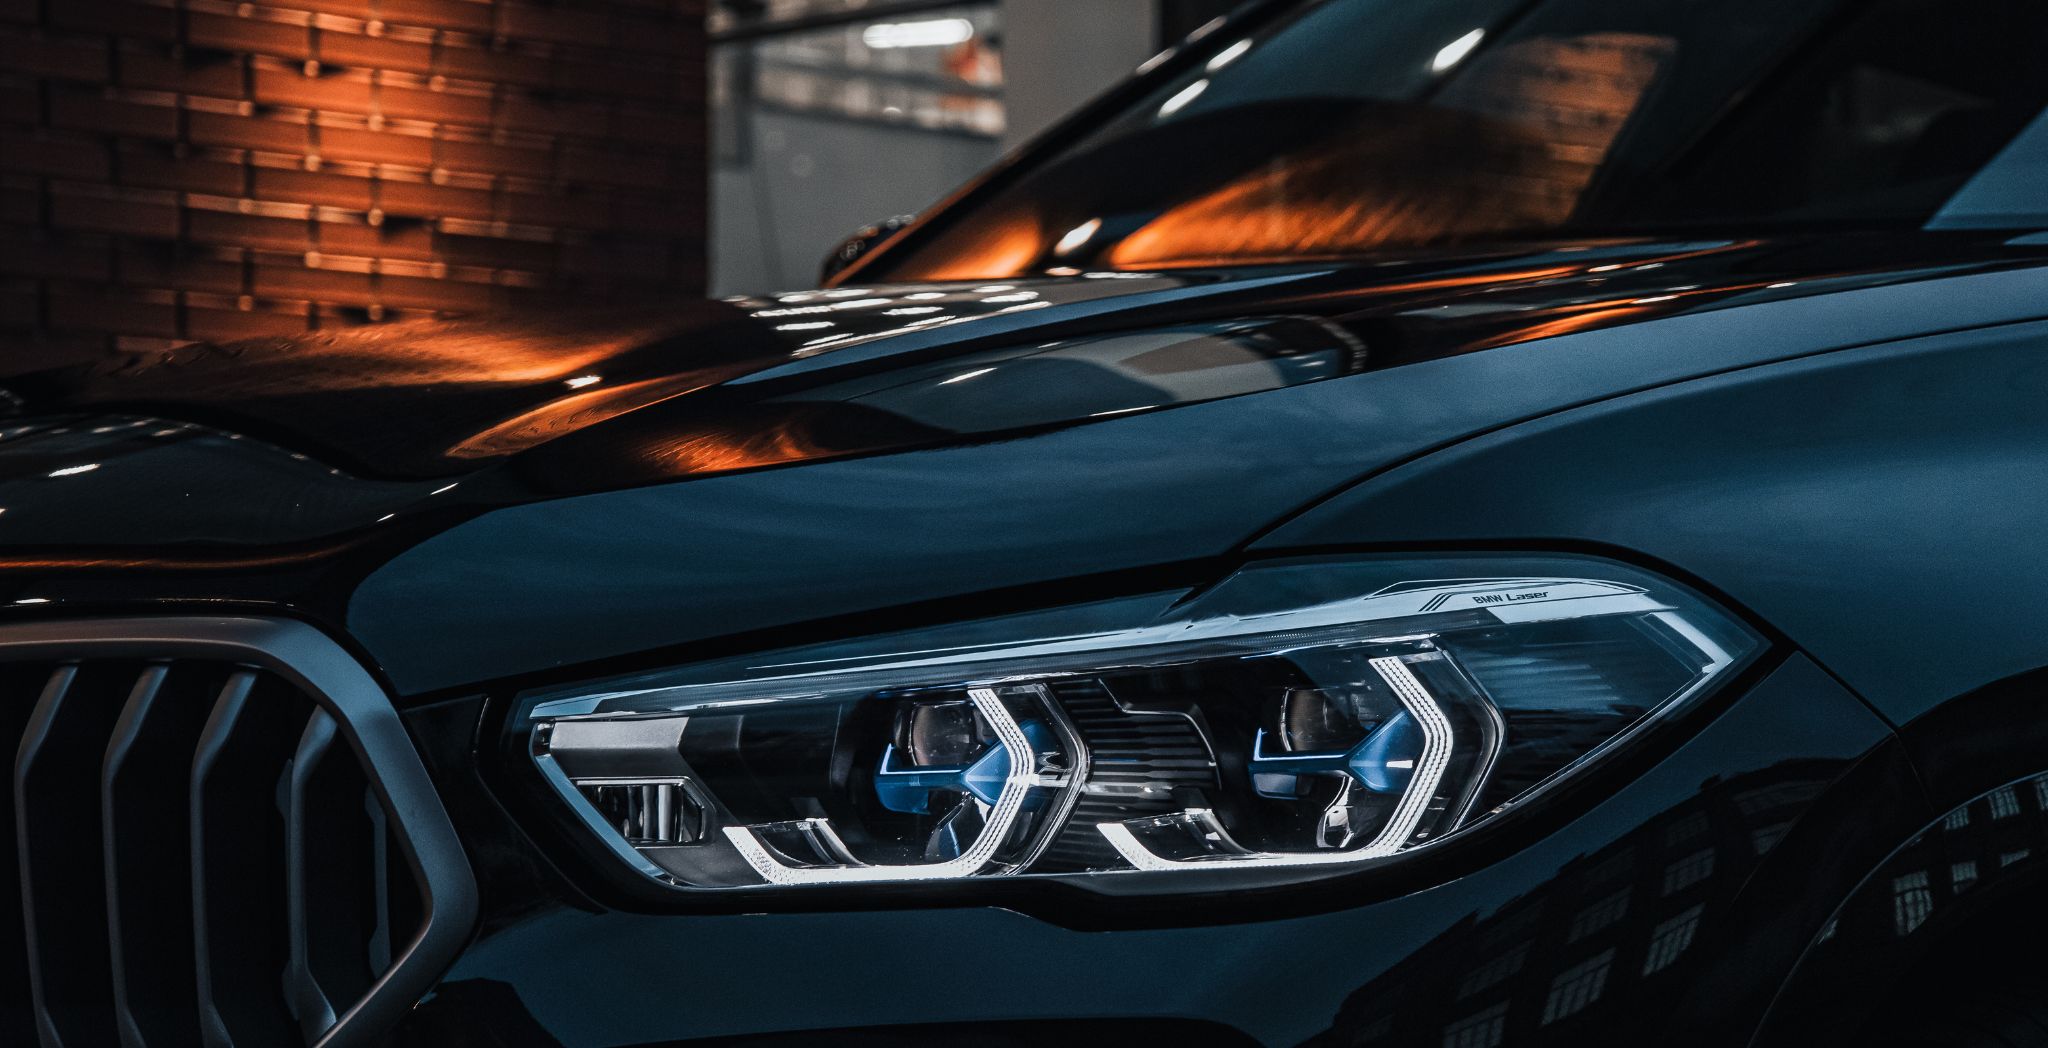 Preserving Your Car’s Appeal: Headlight Restoration Do’s and Don’ts